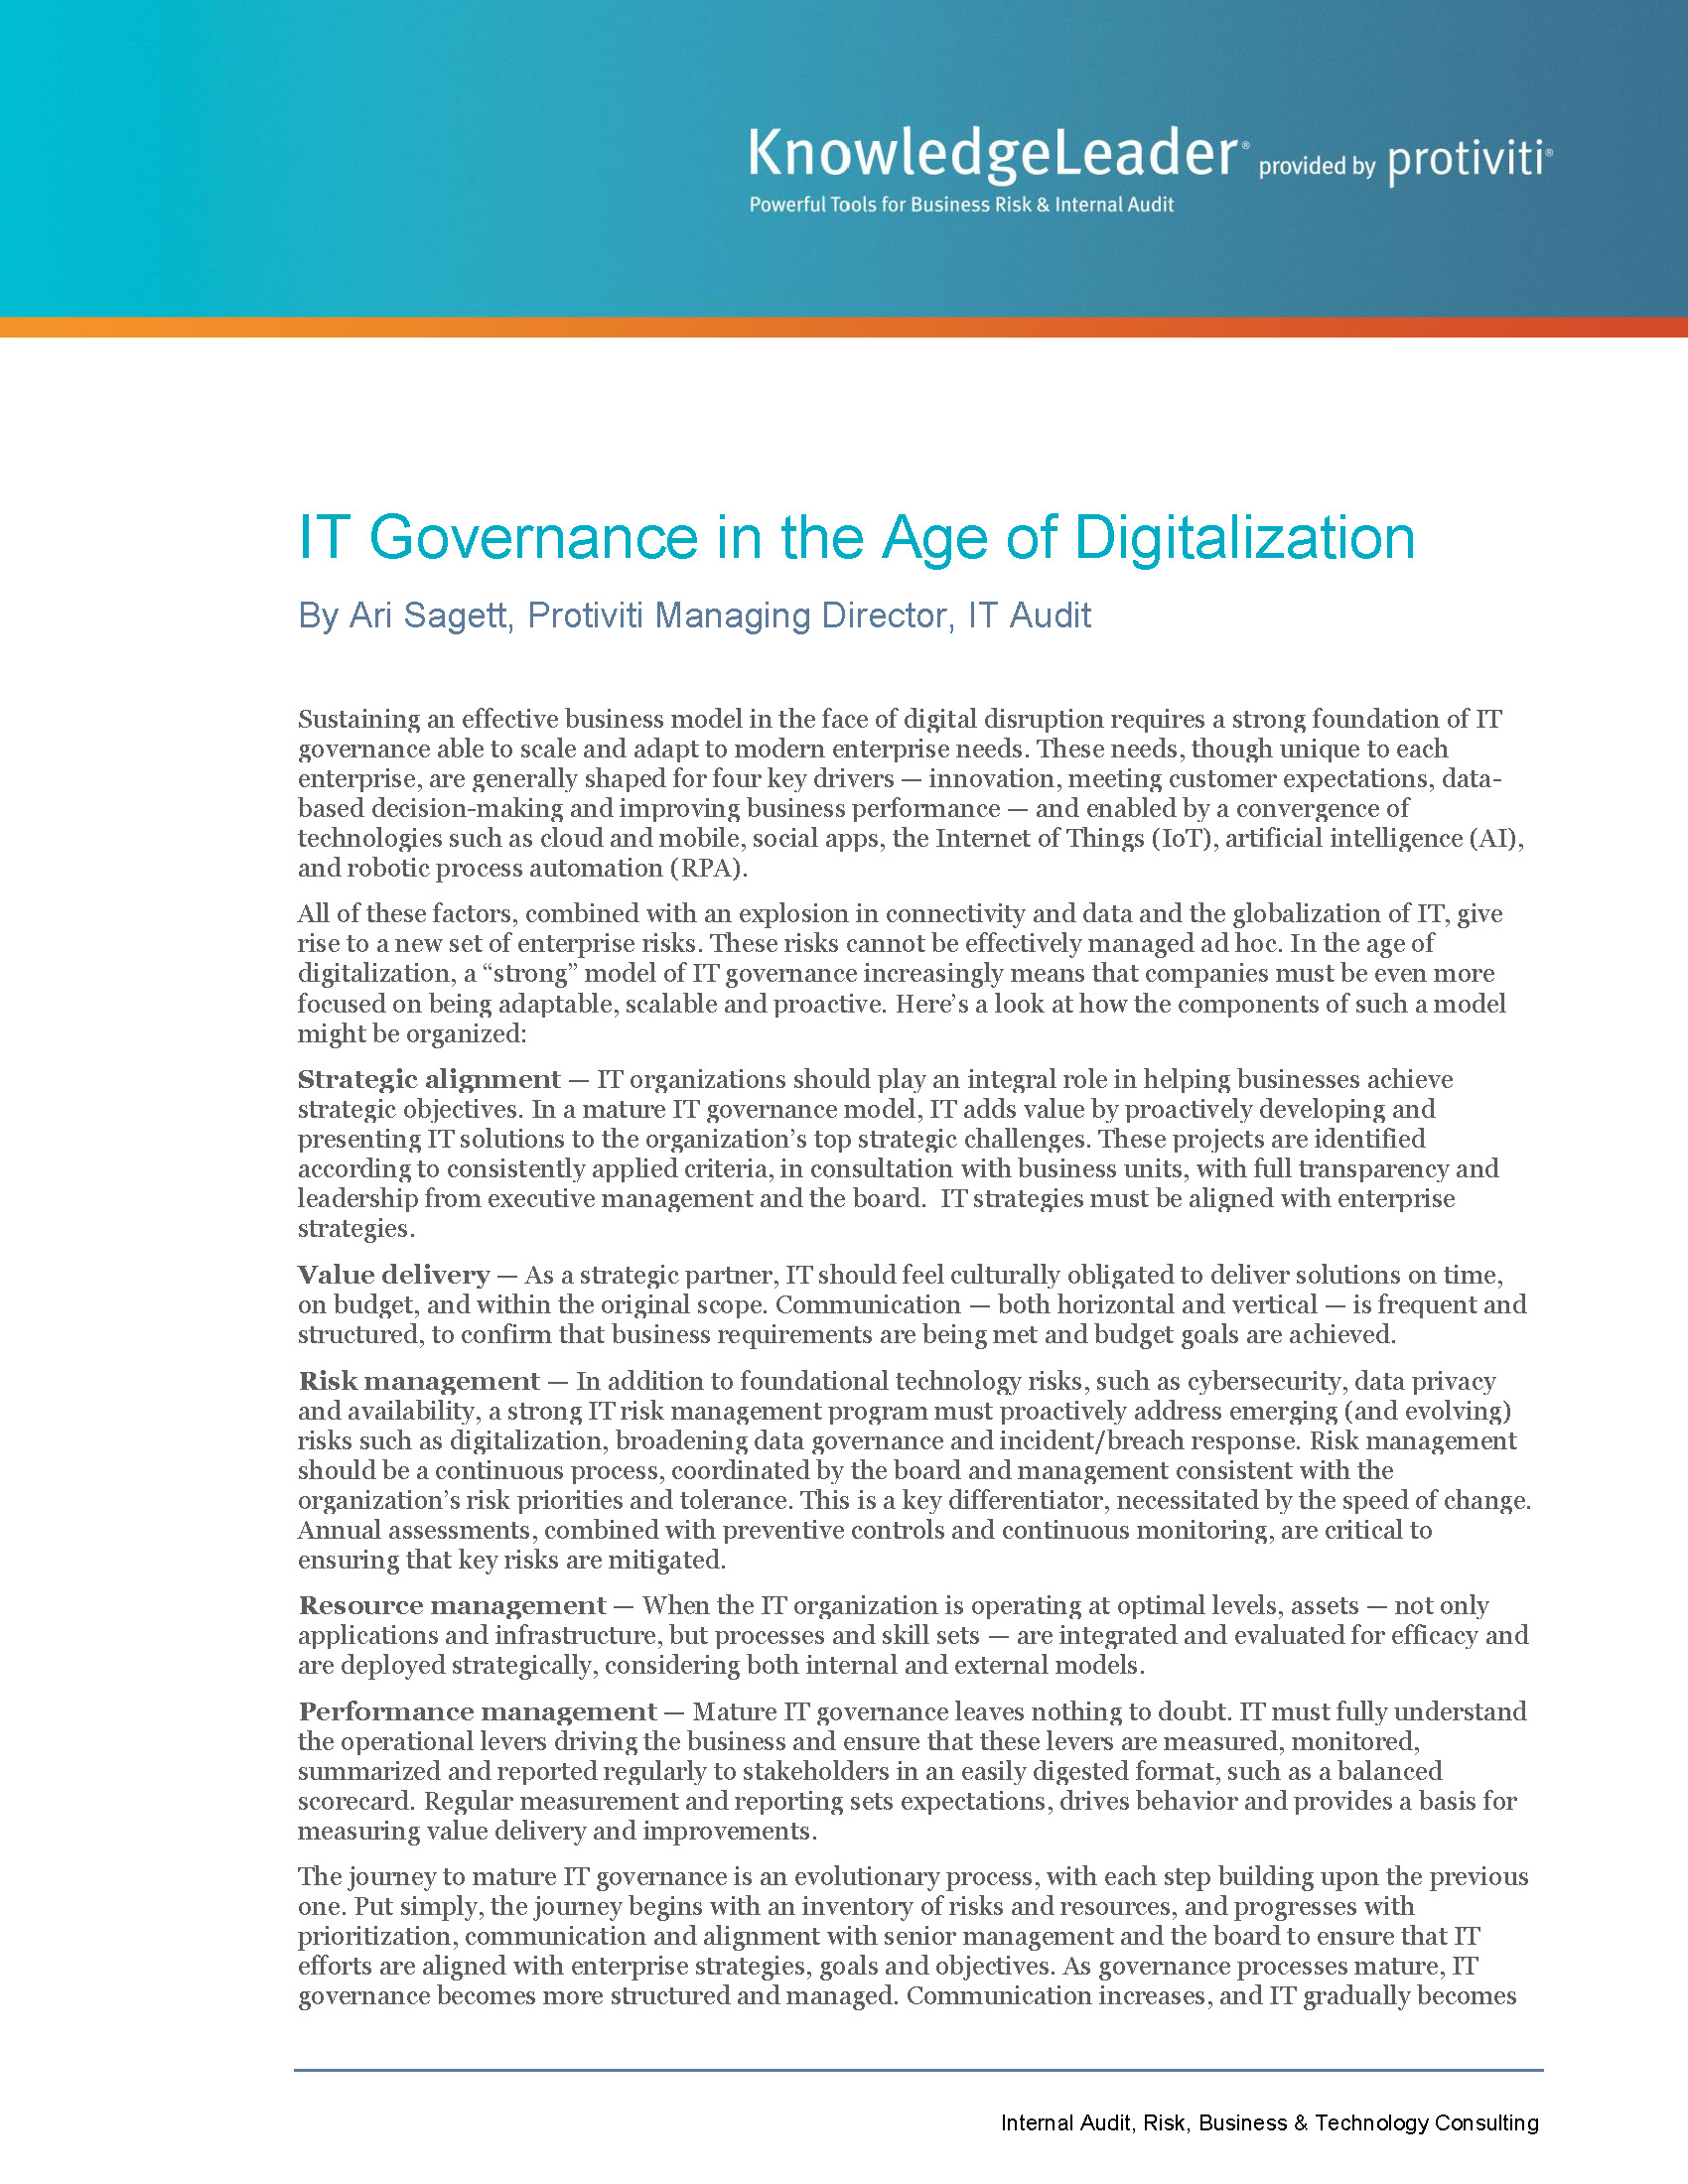 Screenshot of the first page of IT Governance in the Age of Digitalization